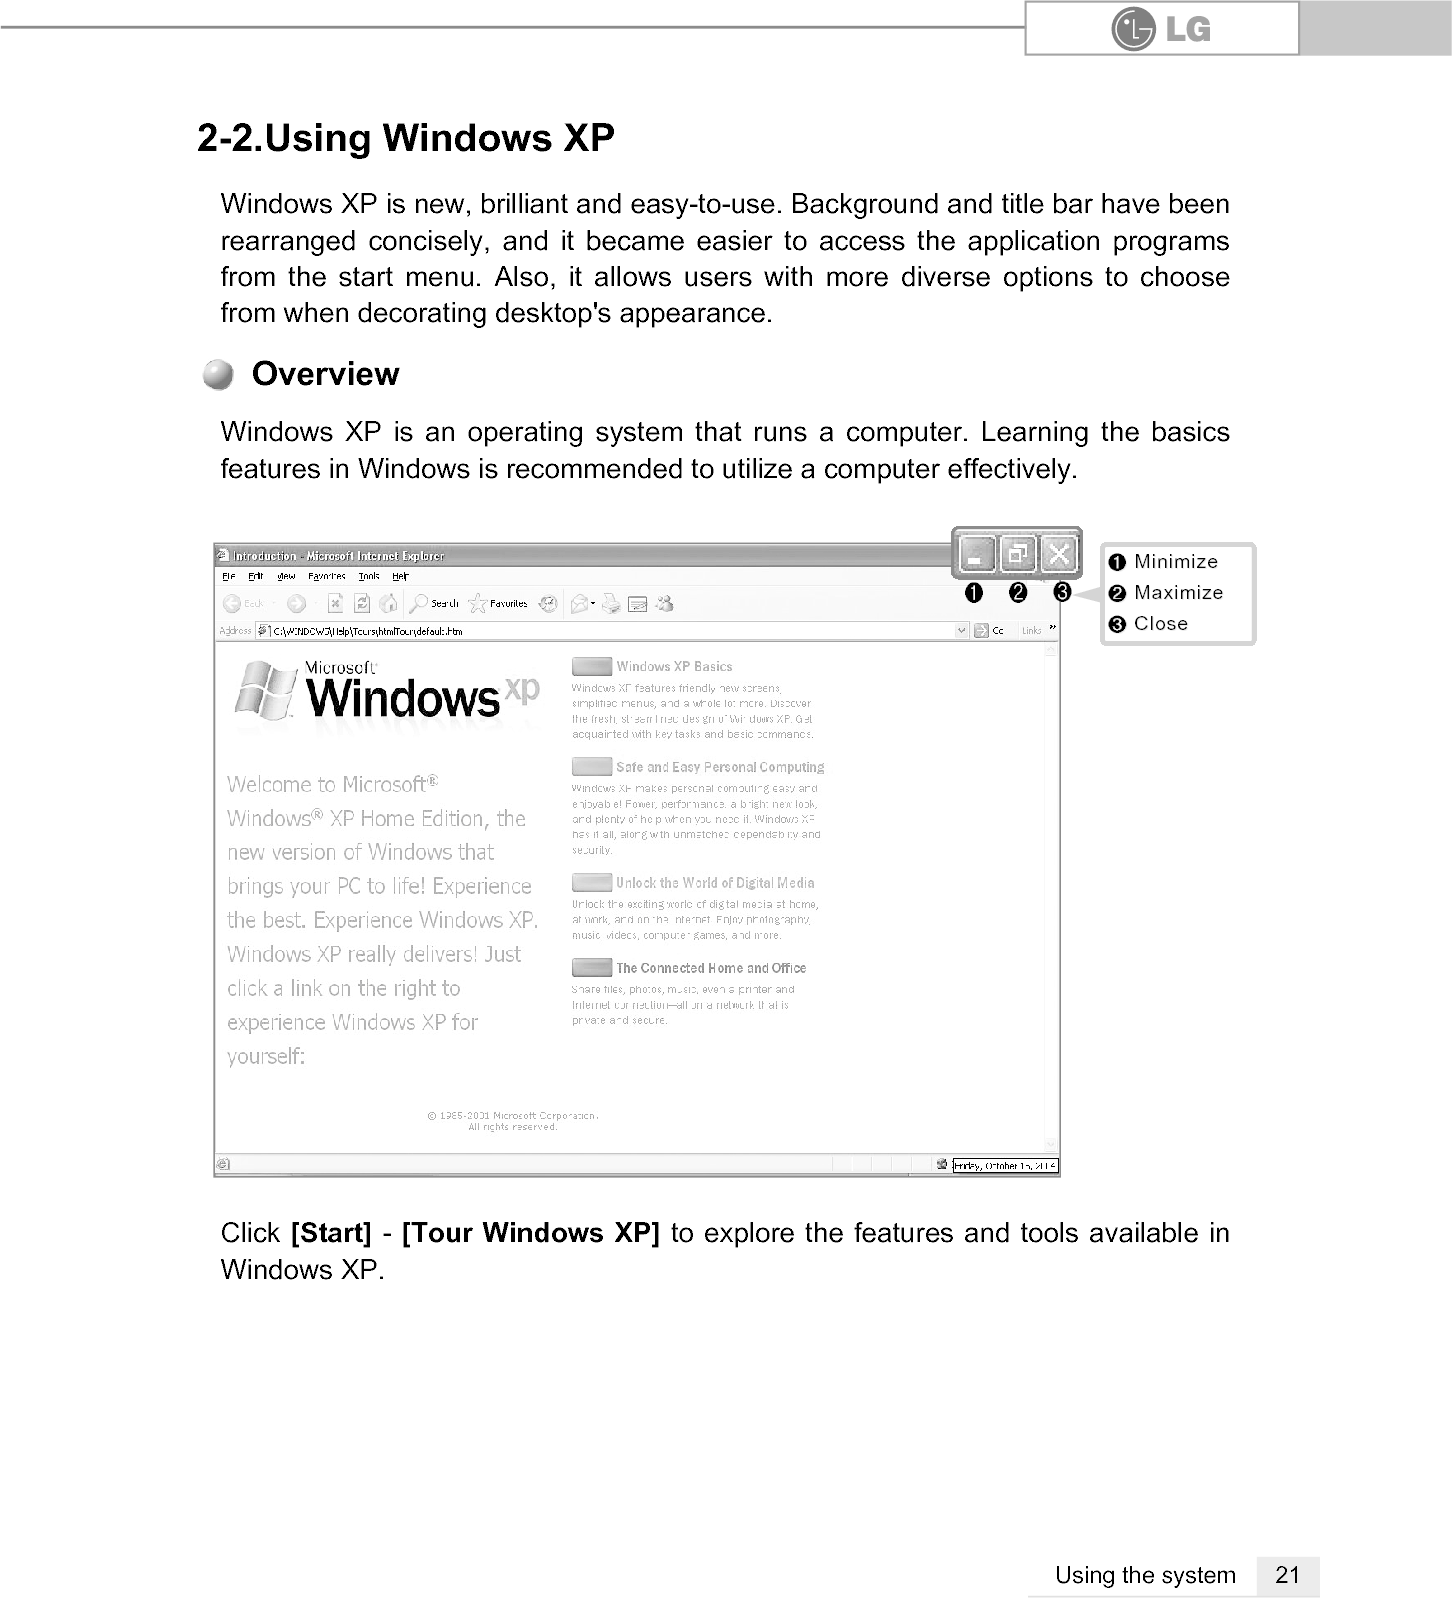 21Using the system2-2.Using Windows XPWindows XP is new, brilliant and easy-to-use. Background and title bar have beenrearranged concisely, and it became easier to access the application programsfrom the start menu. Also, it allows users with more diverse options to choosefrom when decorating desktop&apos;s appearance.Click [Start] - [Tour Windows XP] to explore the features and tools available inWindows XP.Windows XP is an operating system that runs a computer. Learning the basicsfeatures in Windows is recommended to utilize a computer effectively. Overview℘ℙℚ℘℘MinimizeMinimizeℙℙMaximizeMaximizeℚℚCloseClose